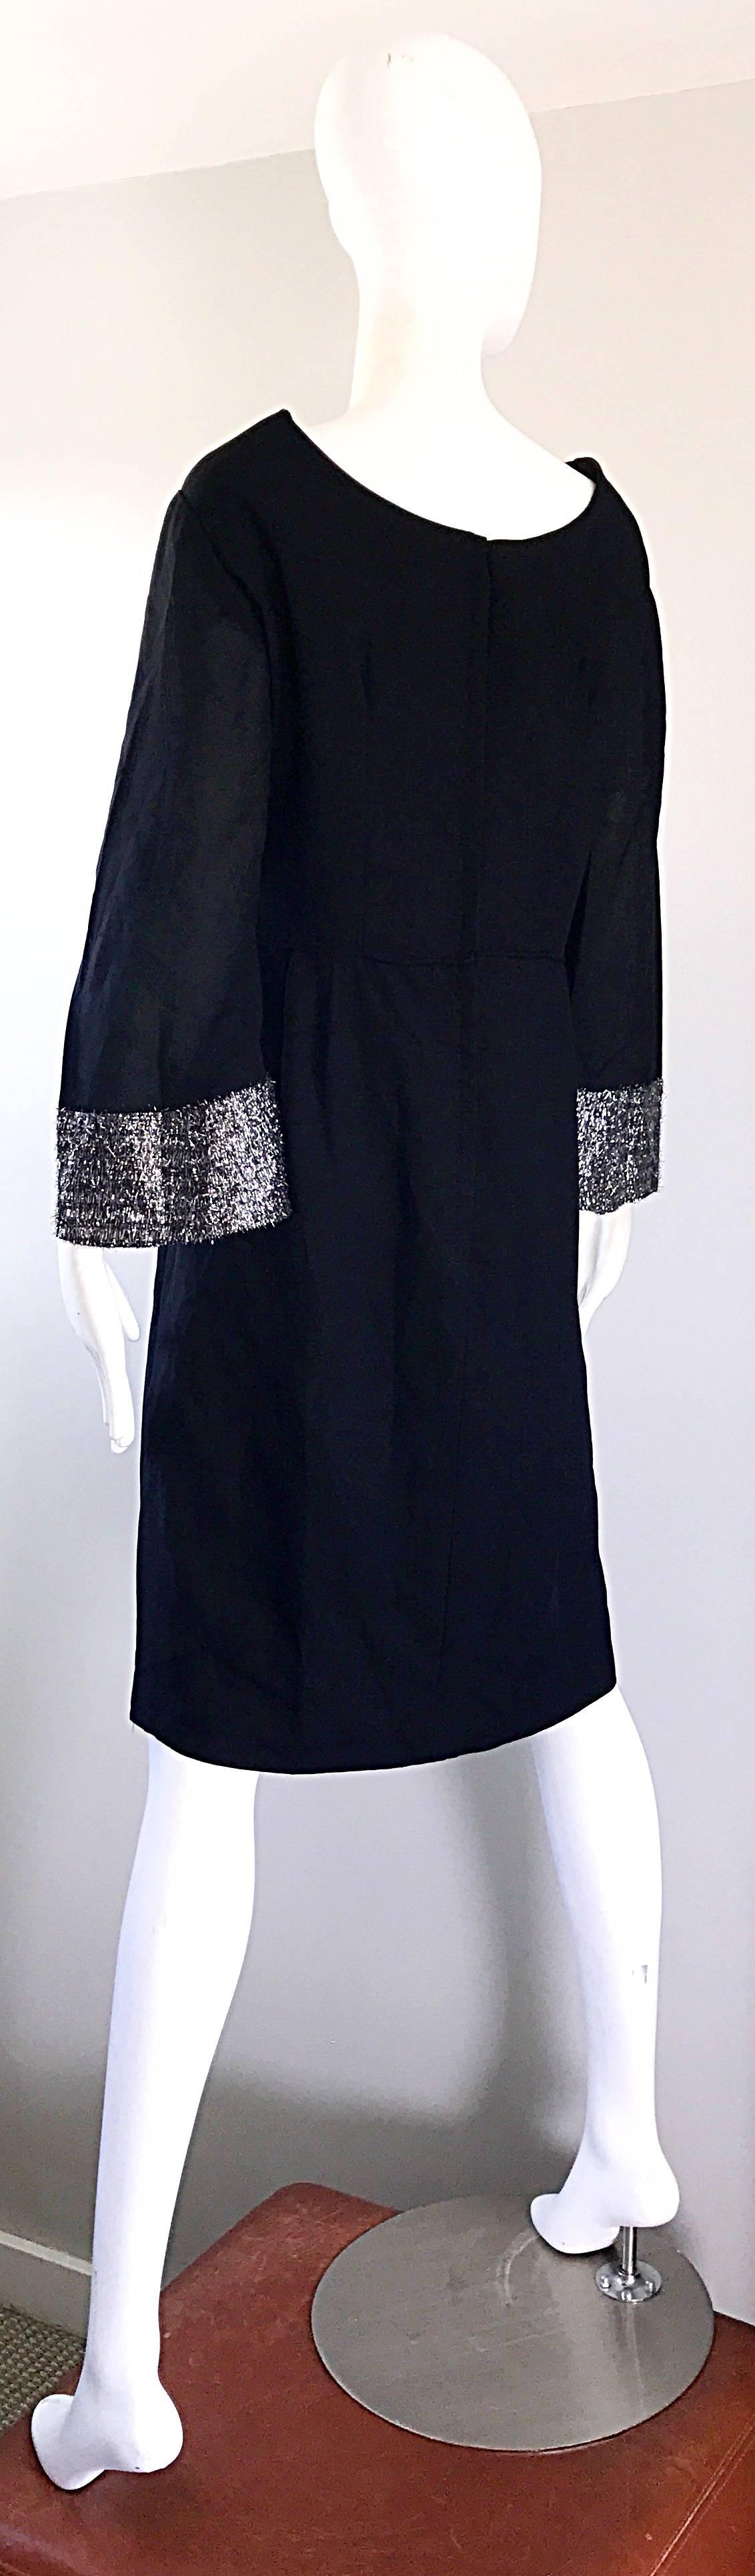 Chic 1960s Plus Size 16 / 18 Silver + Black 60s Vintage Bell Sleeve Shift Dress In Excellent Condition For Sale In San Diego, CA